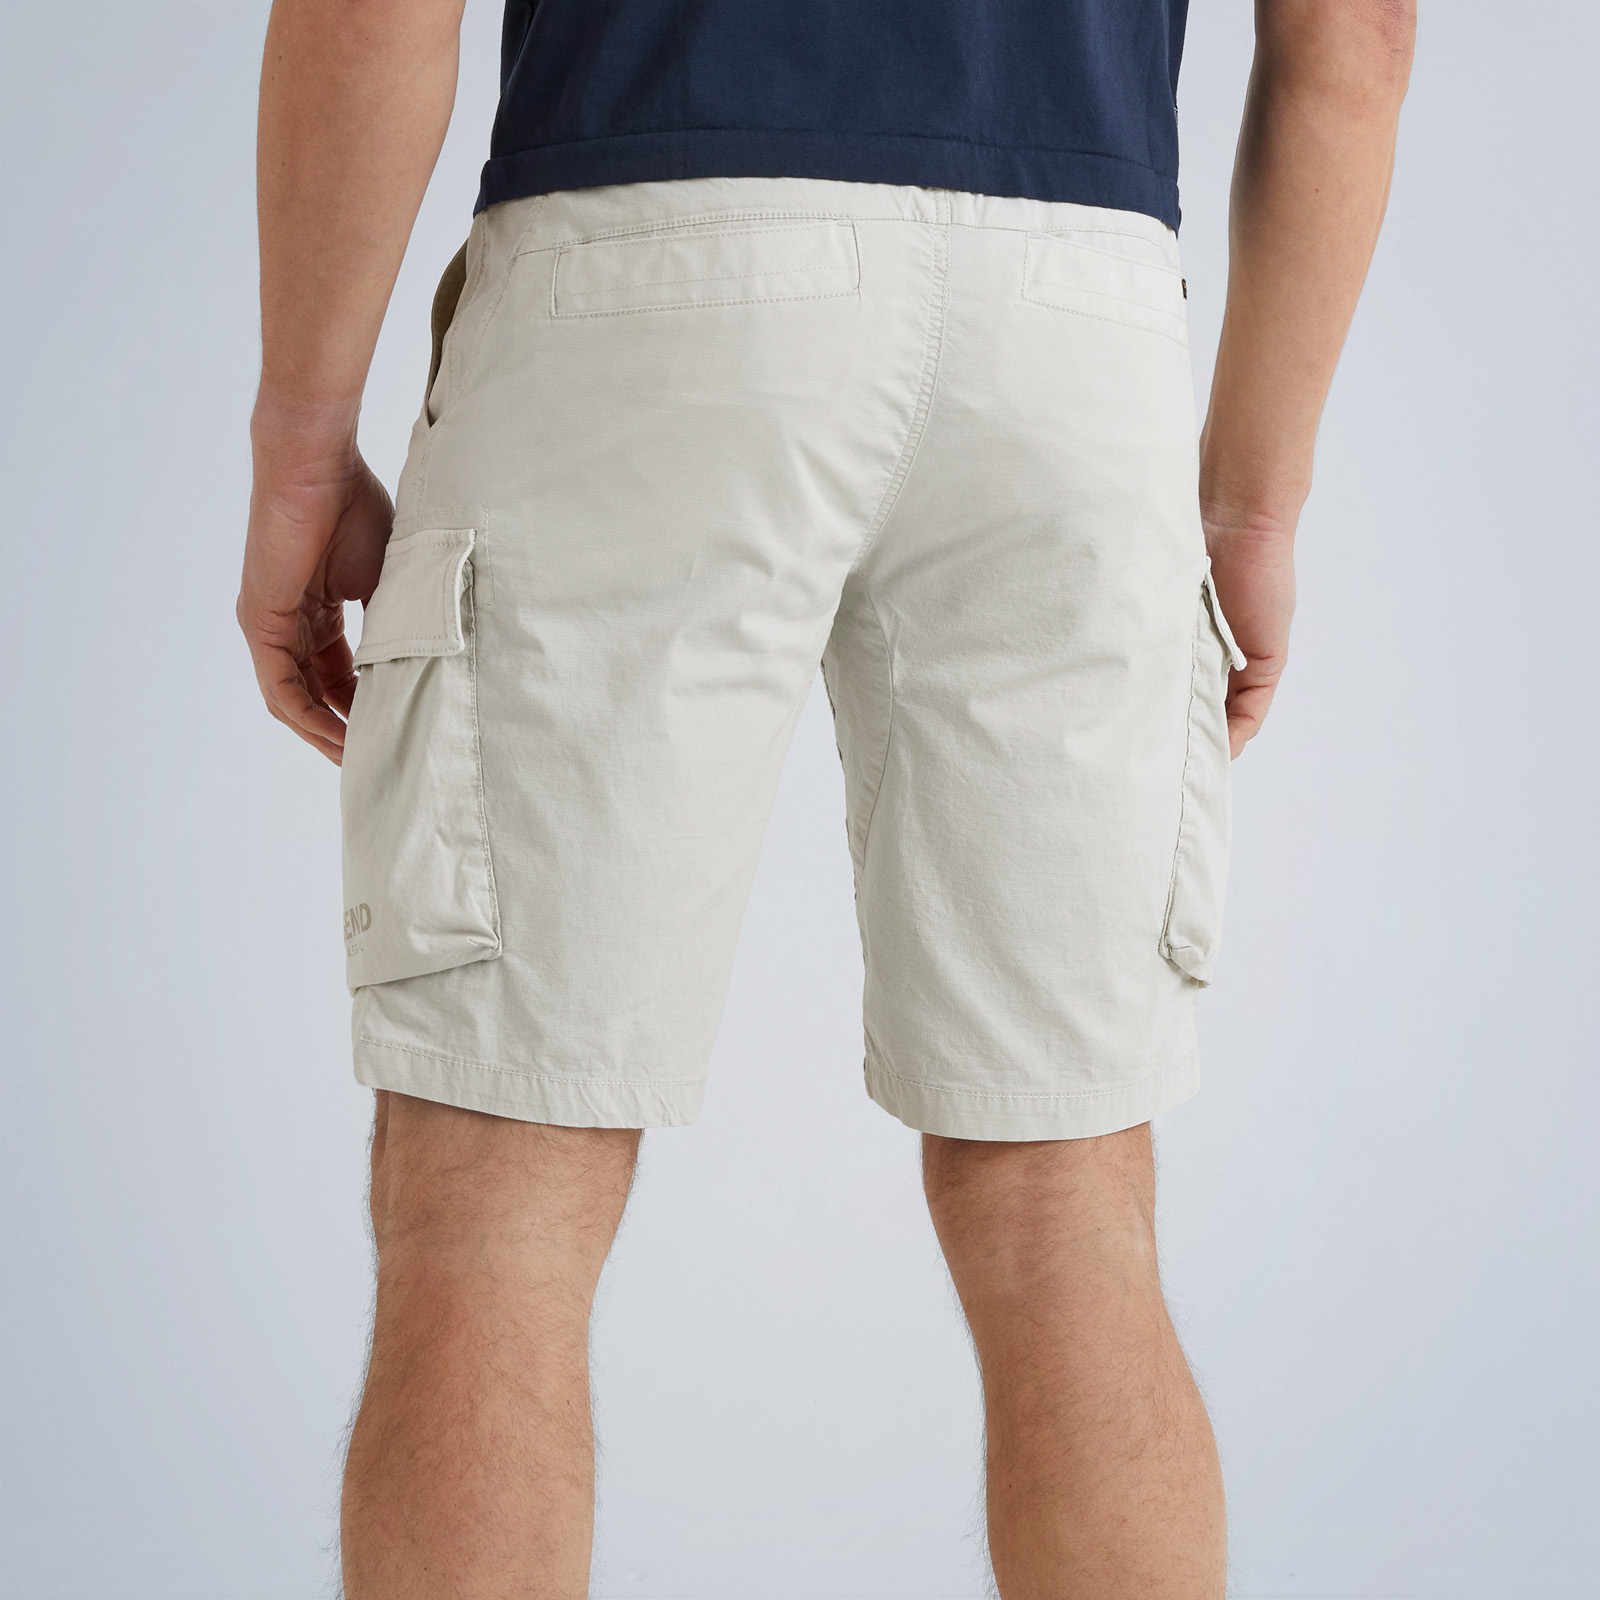 PME returns | shipping Cargo Short Wingtip and LEGEND | Free